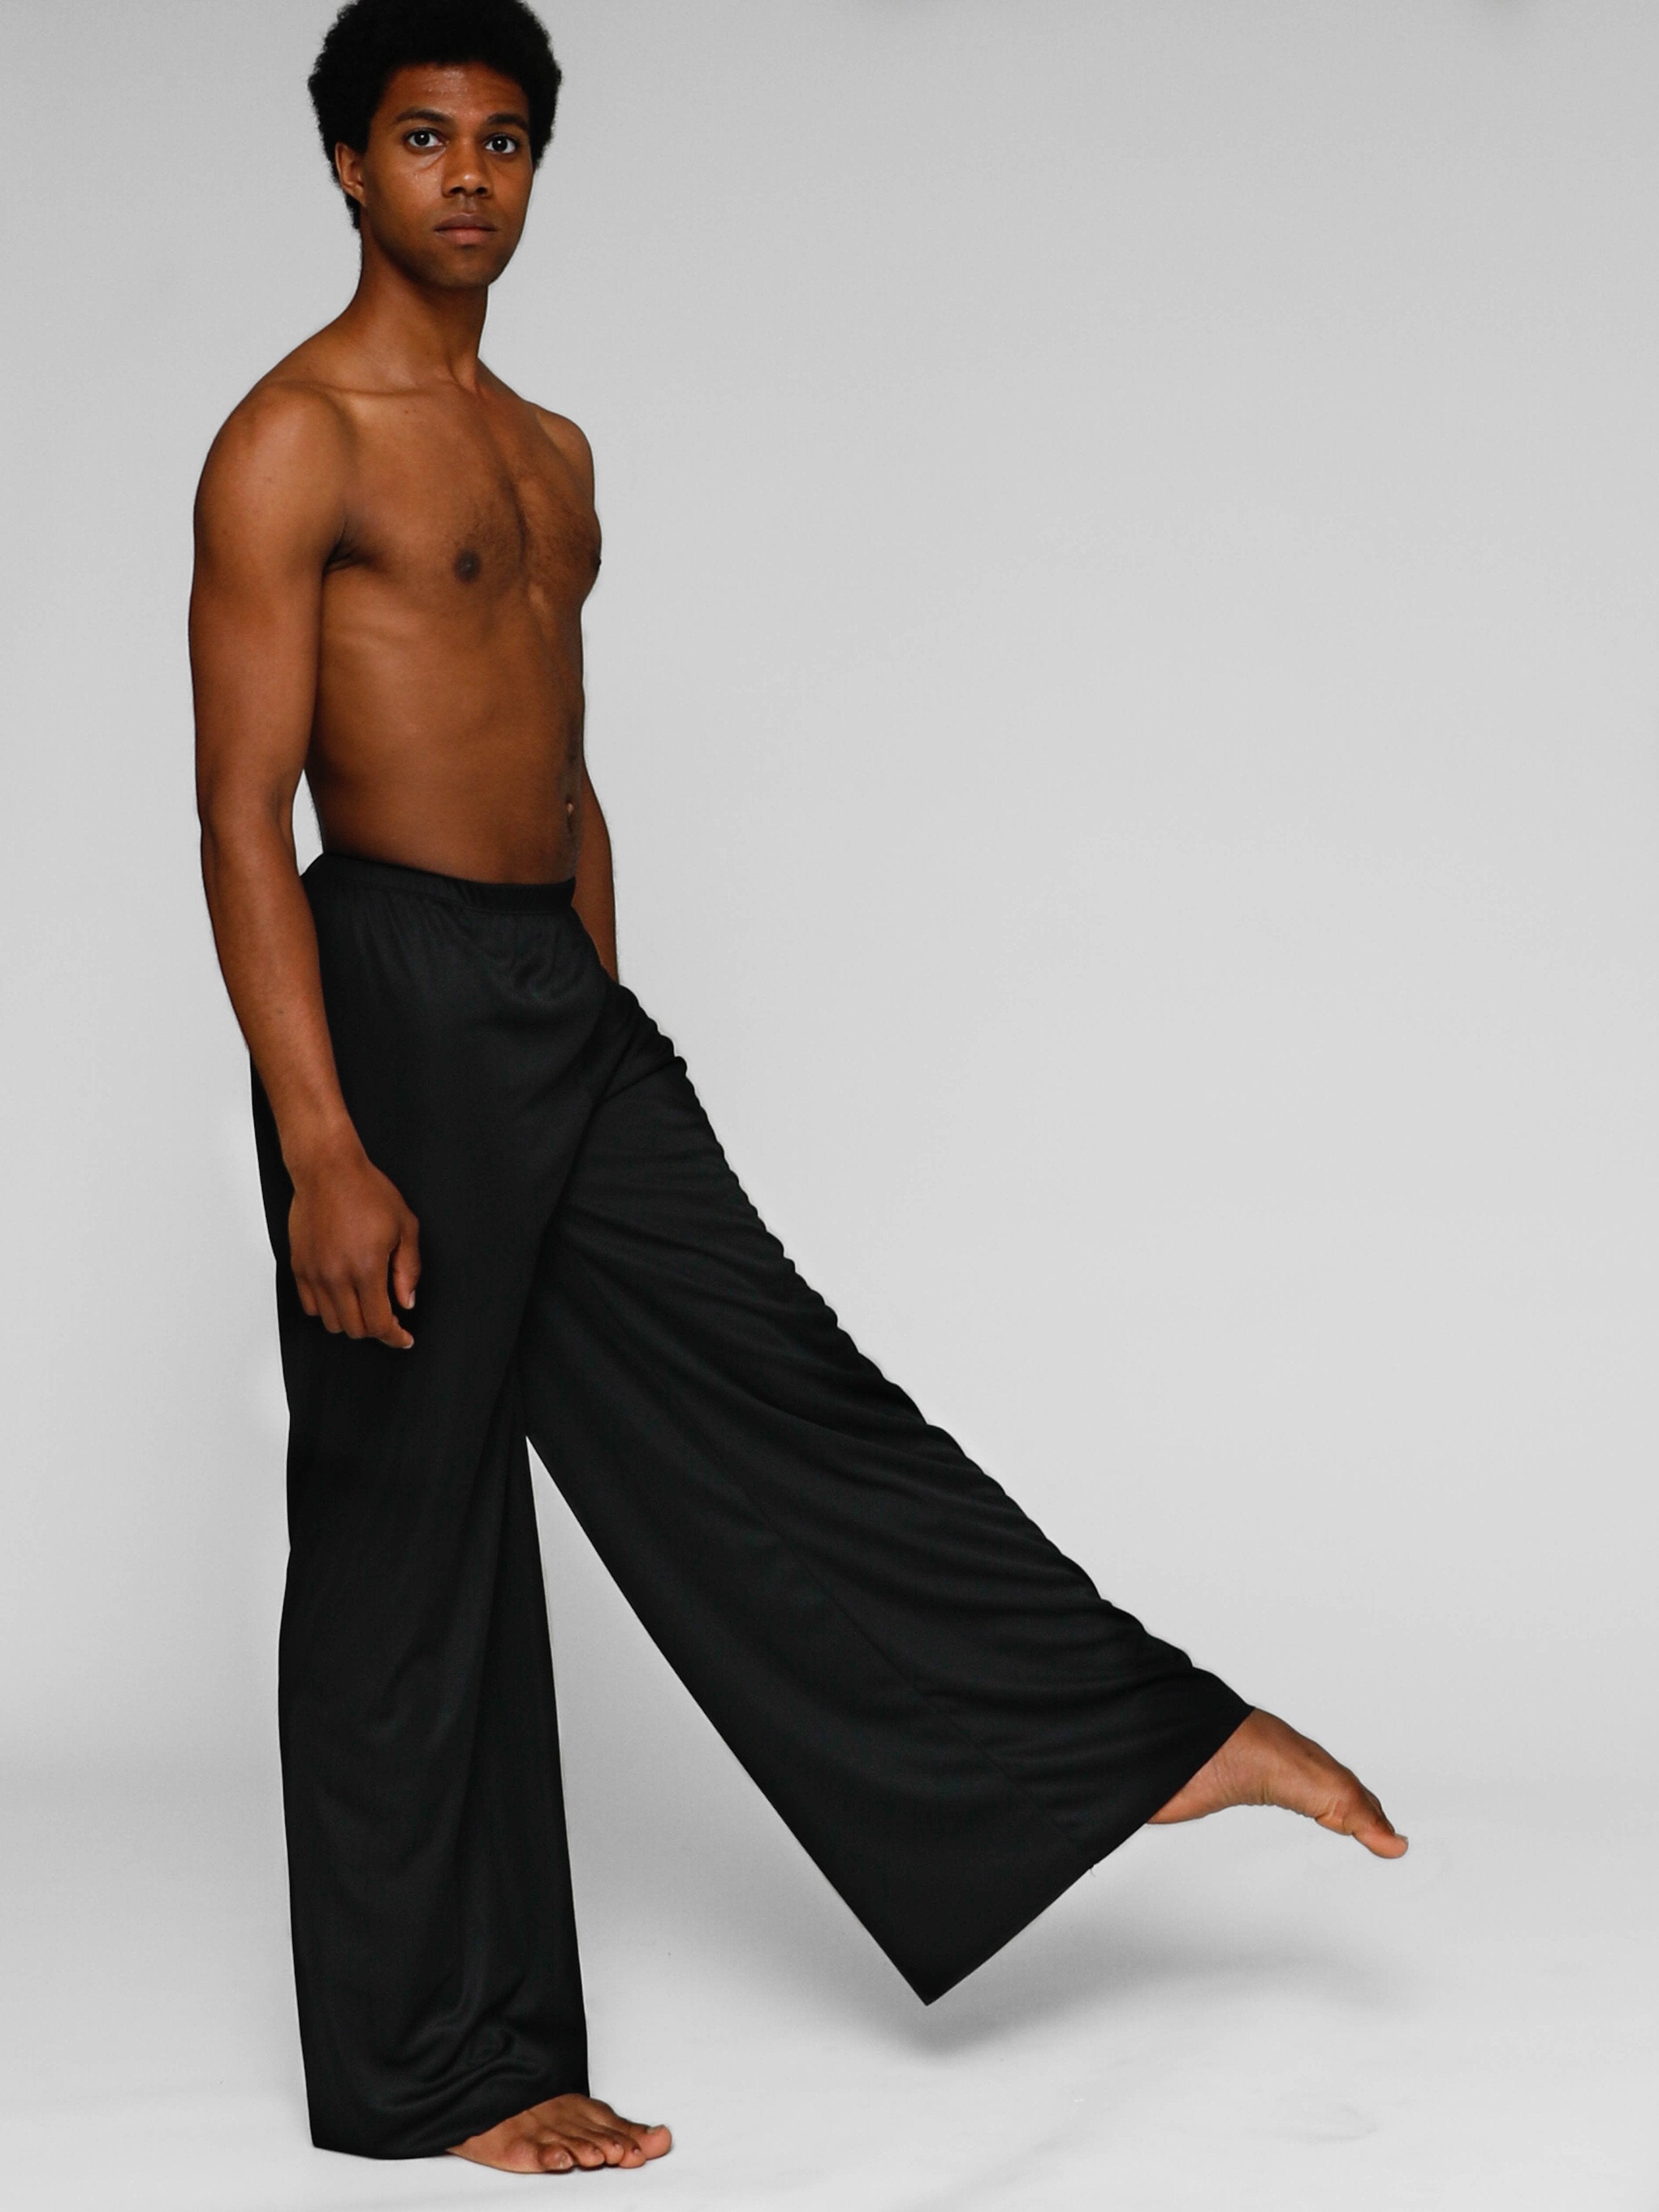 Jazz Pants - MENS – Body Wrappers